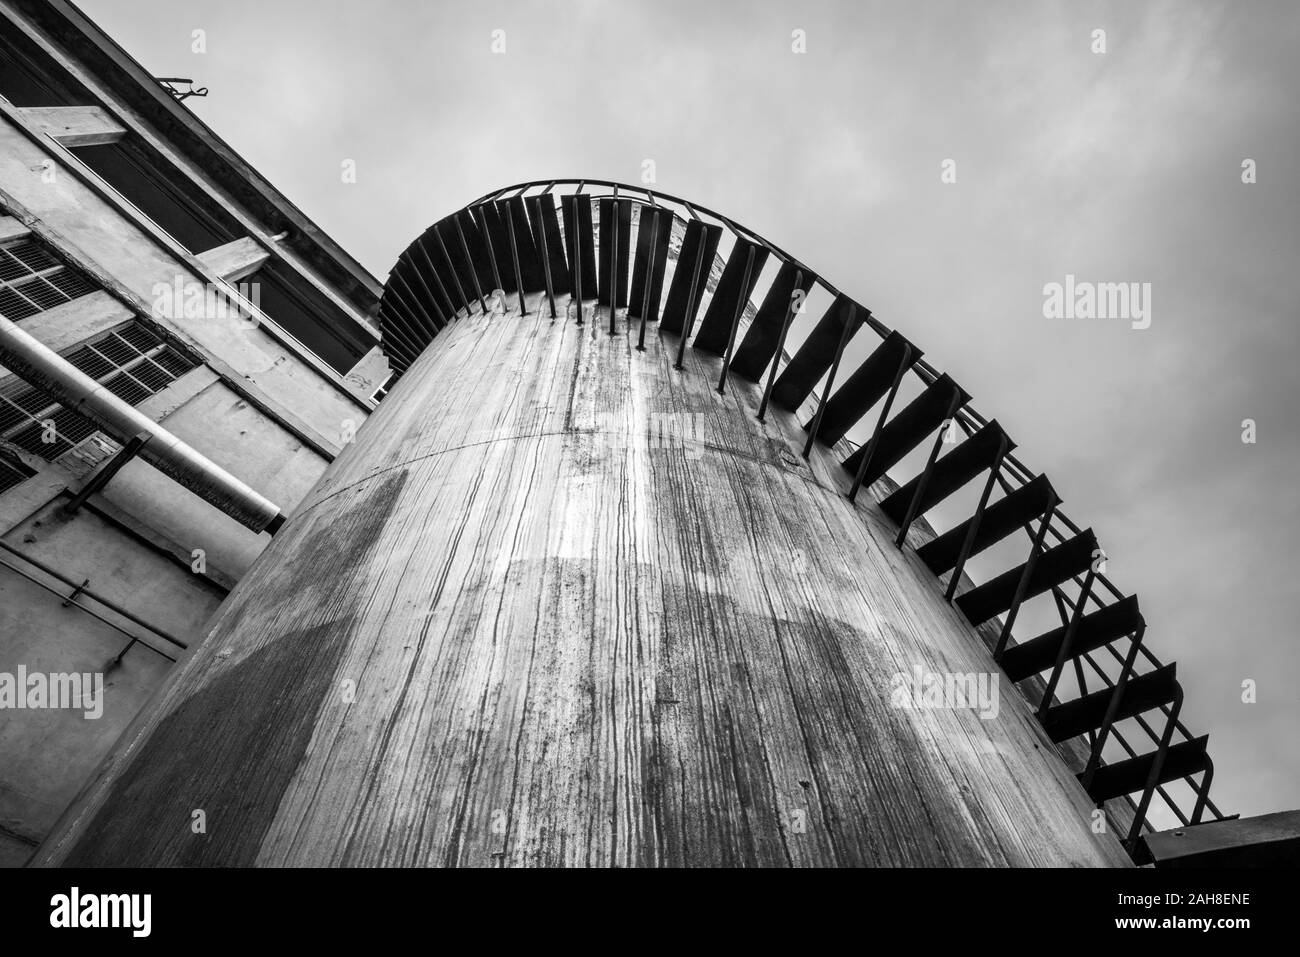 Wide angle geometrical black and white view of a large silo with a spiral staircase Stock Photo